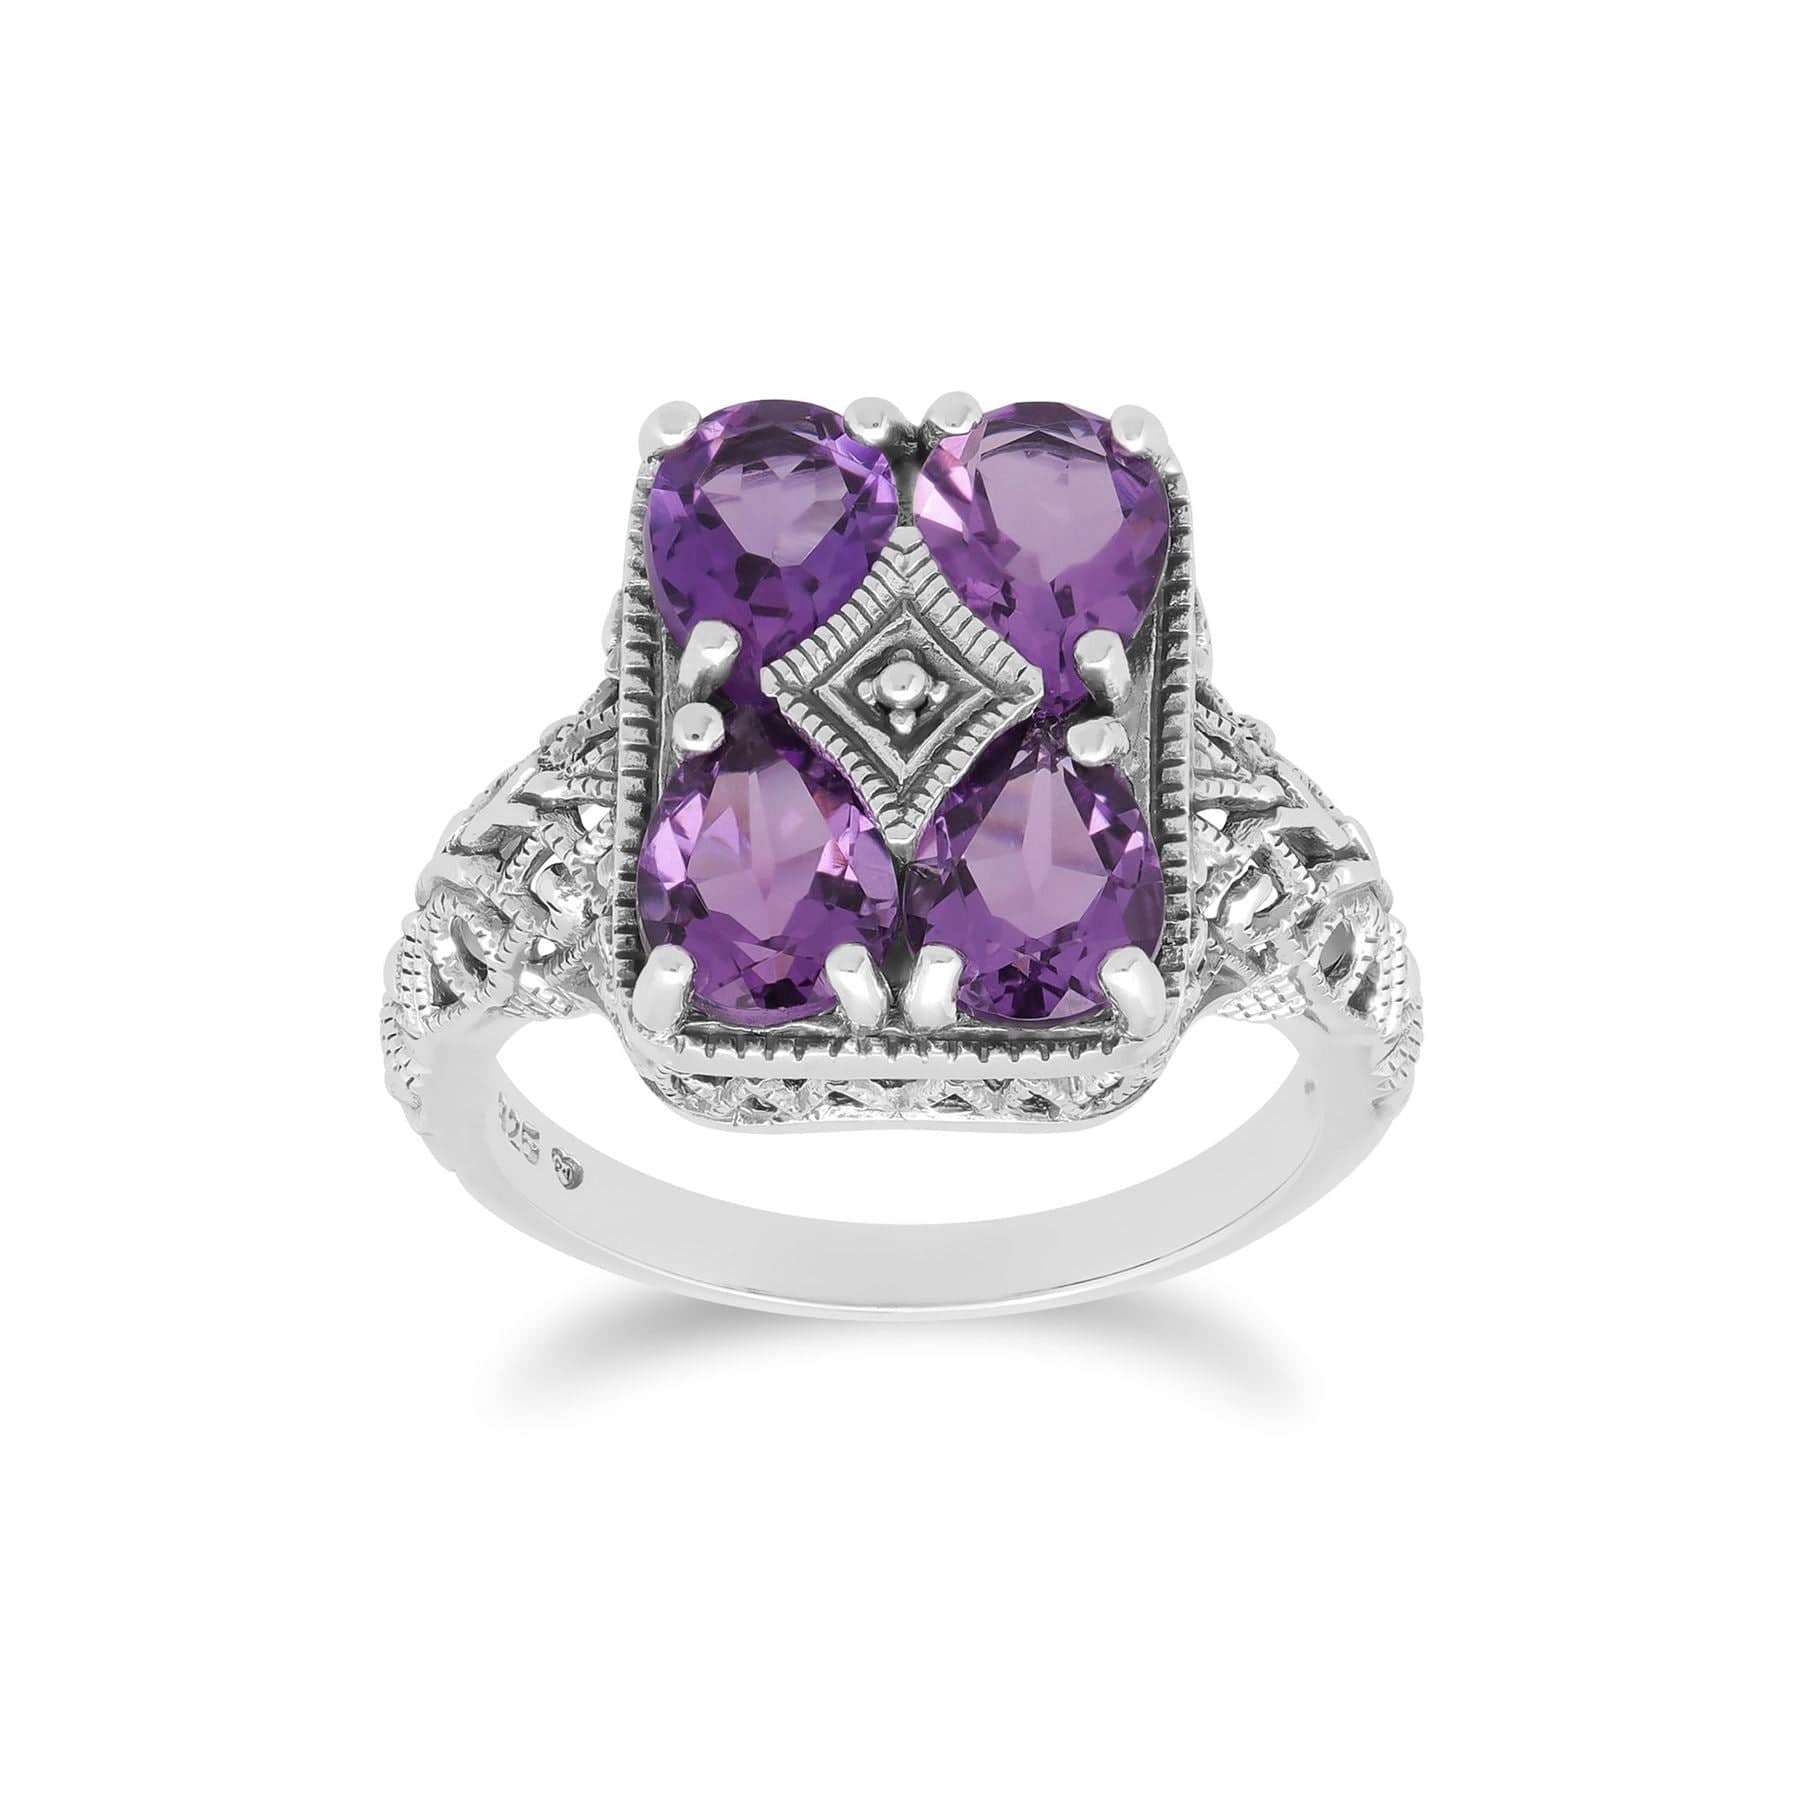 241R031002925 Art Nouveau Inspired Amethyst Statement Ring in 925 Sterling Silver 2